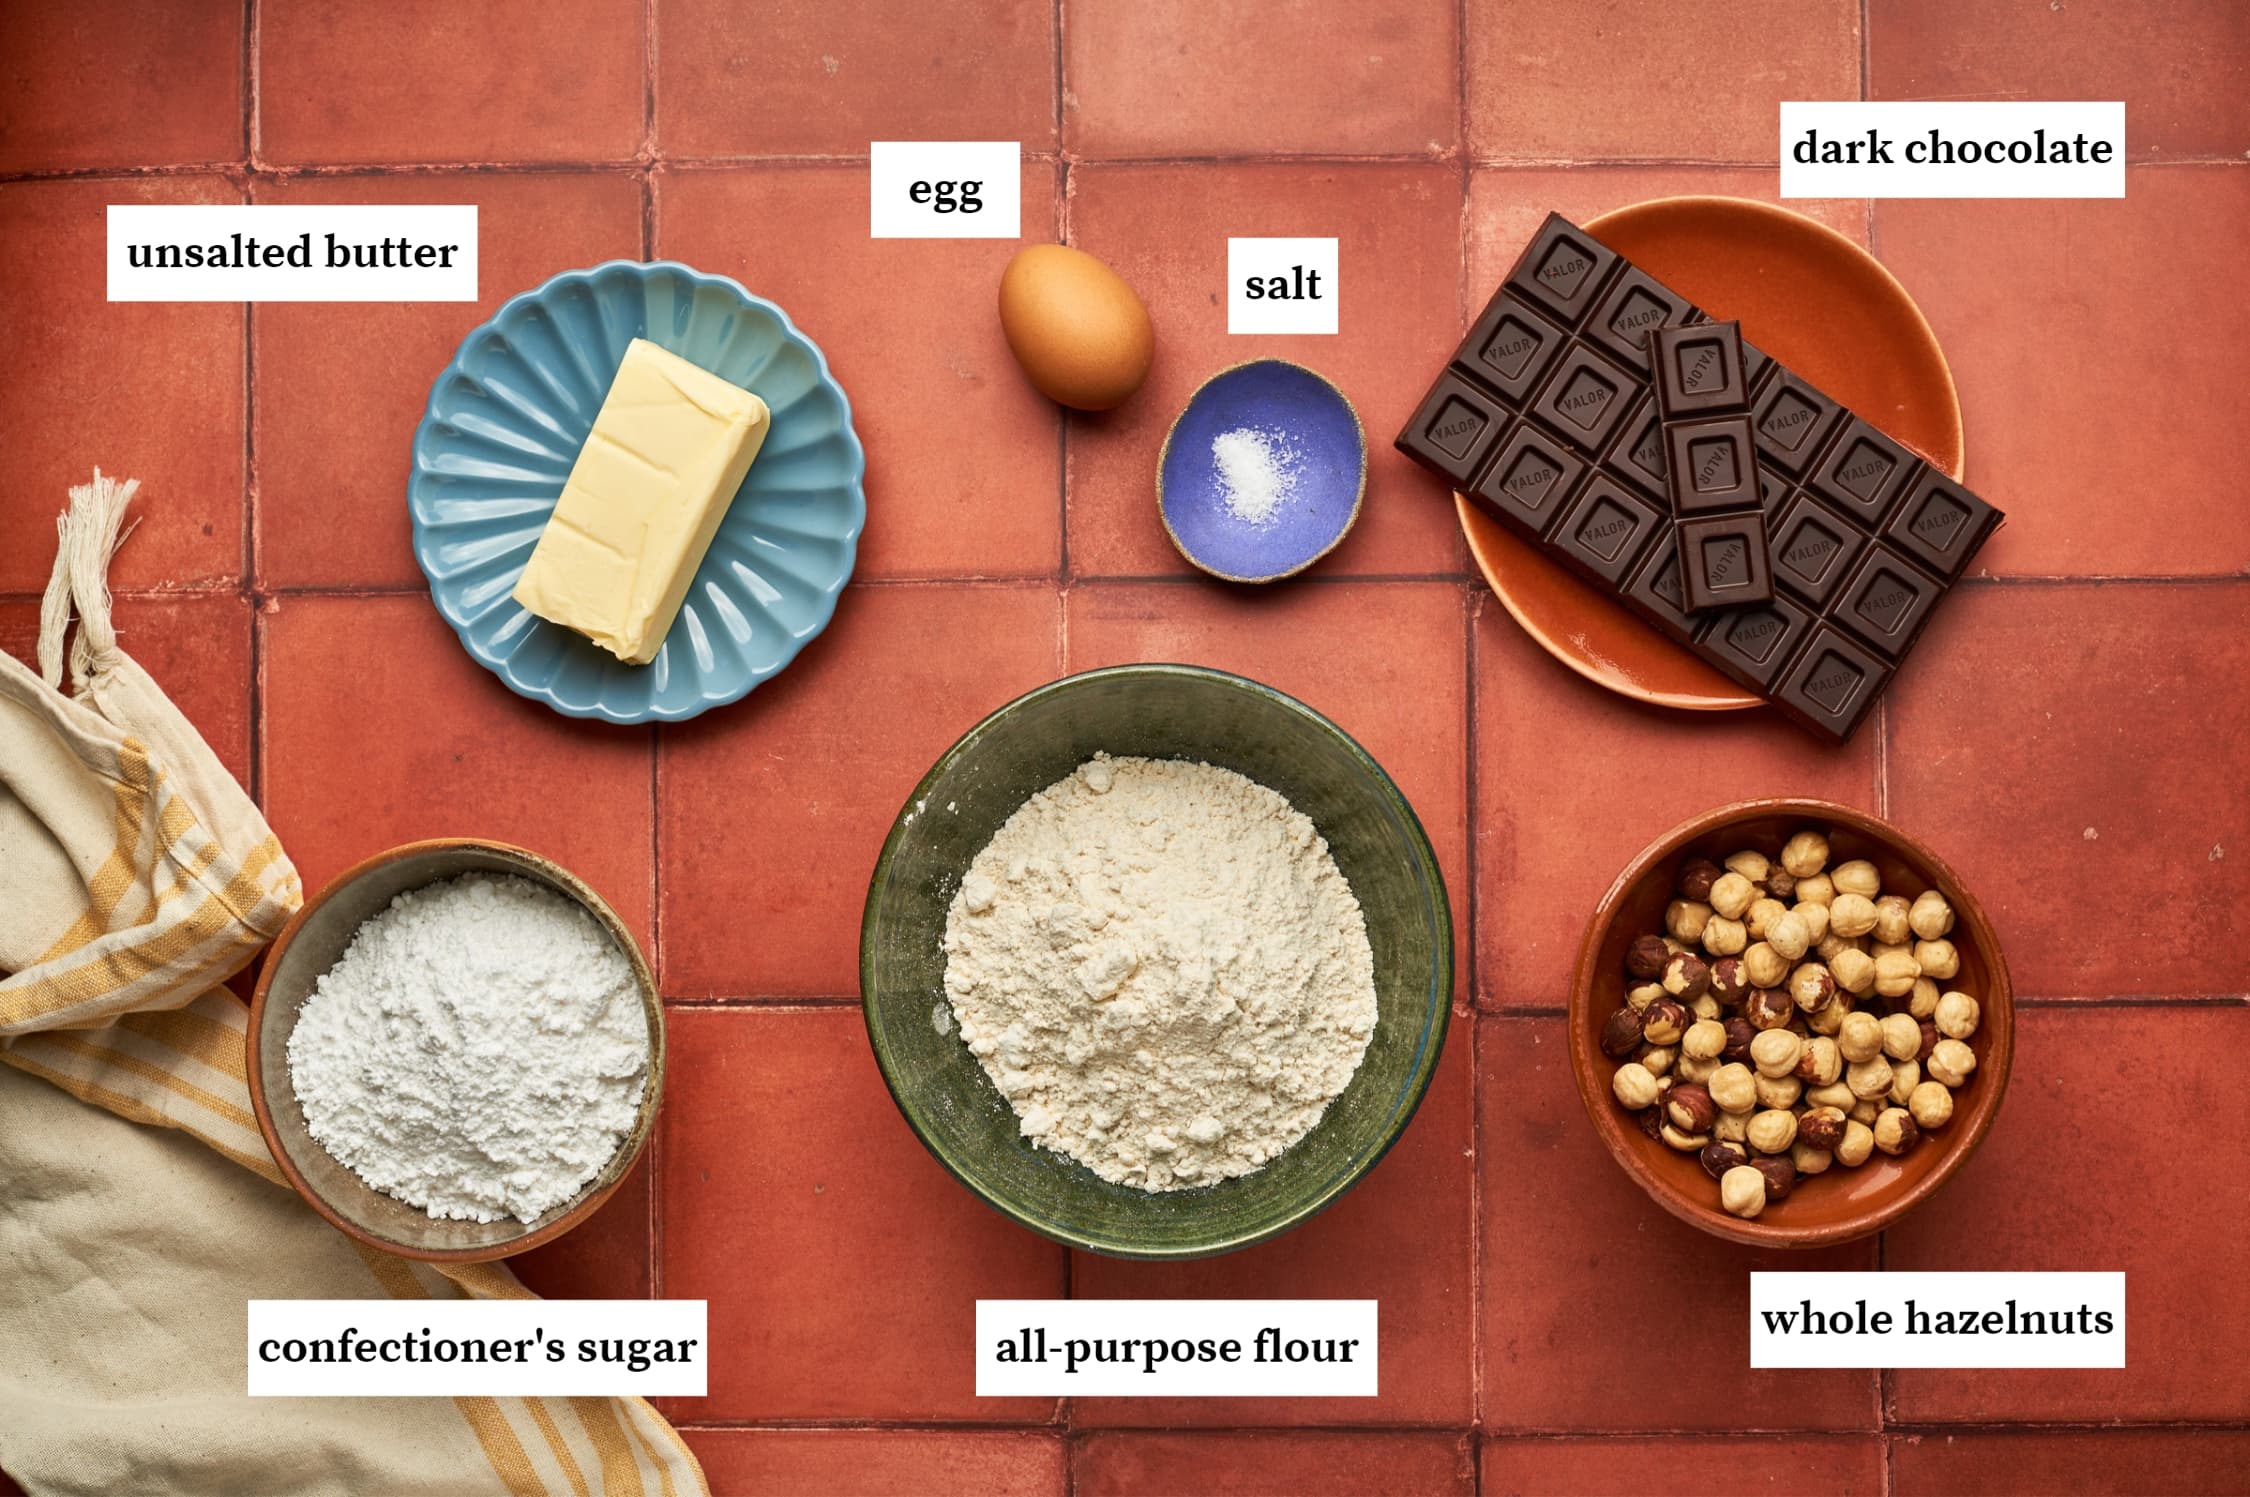 ingredients for baci di dama italian cookies including unsalted butter, egg, salt, dark chocolate, confectioner's sugar all-purpose flour and whole hazelnuts.